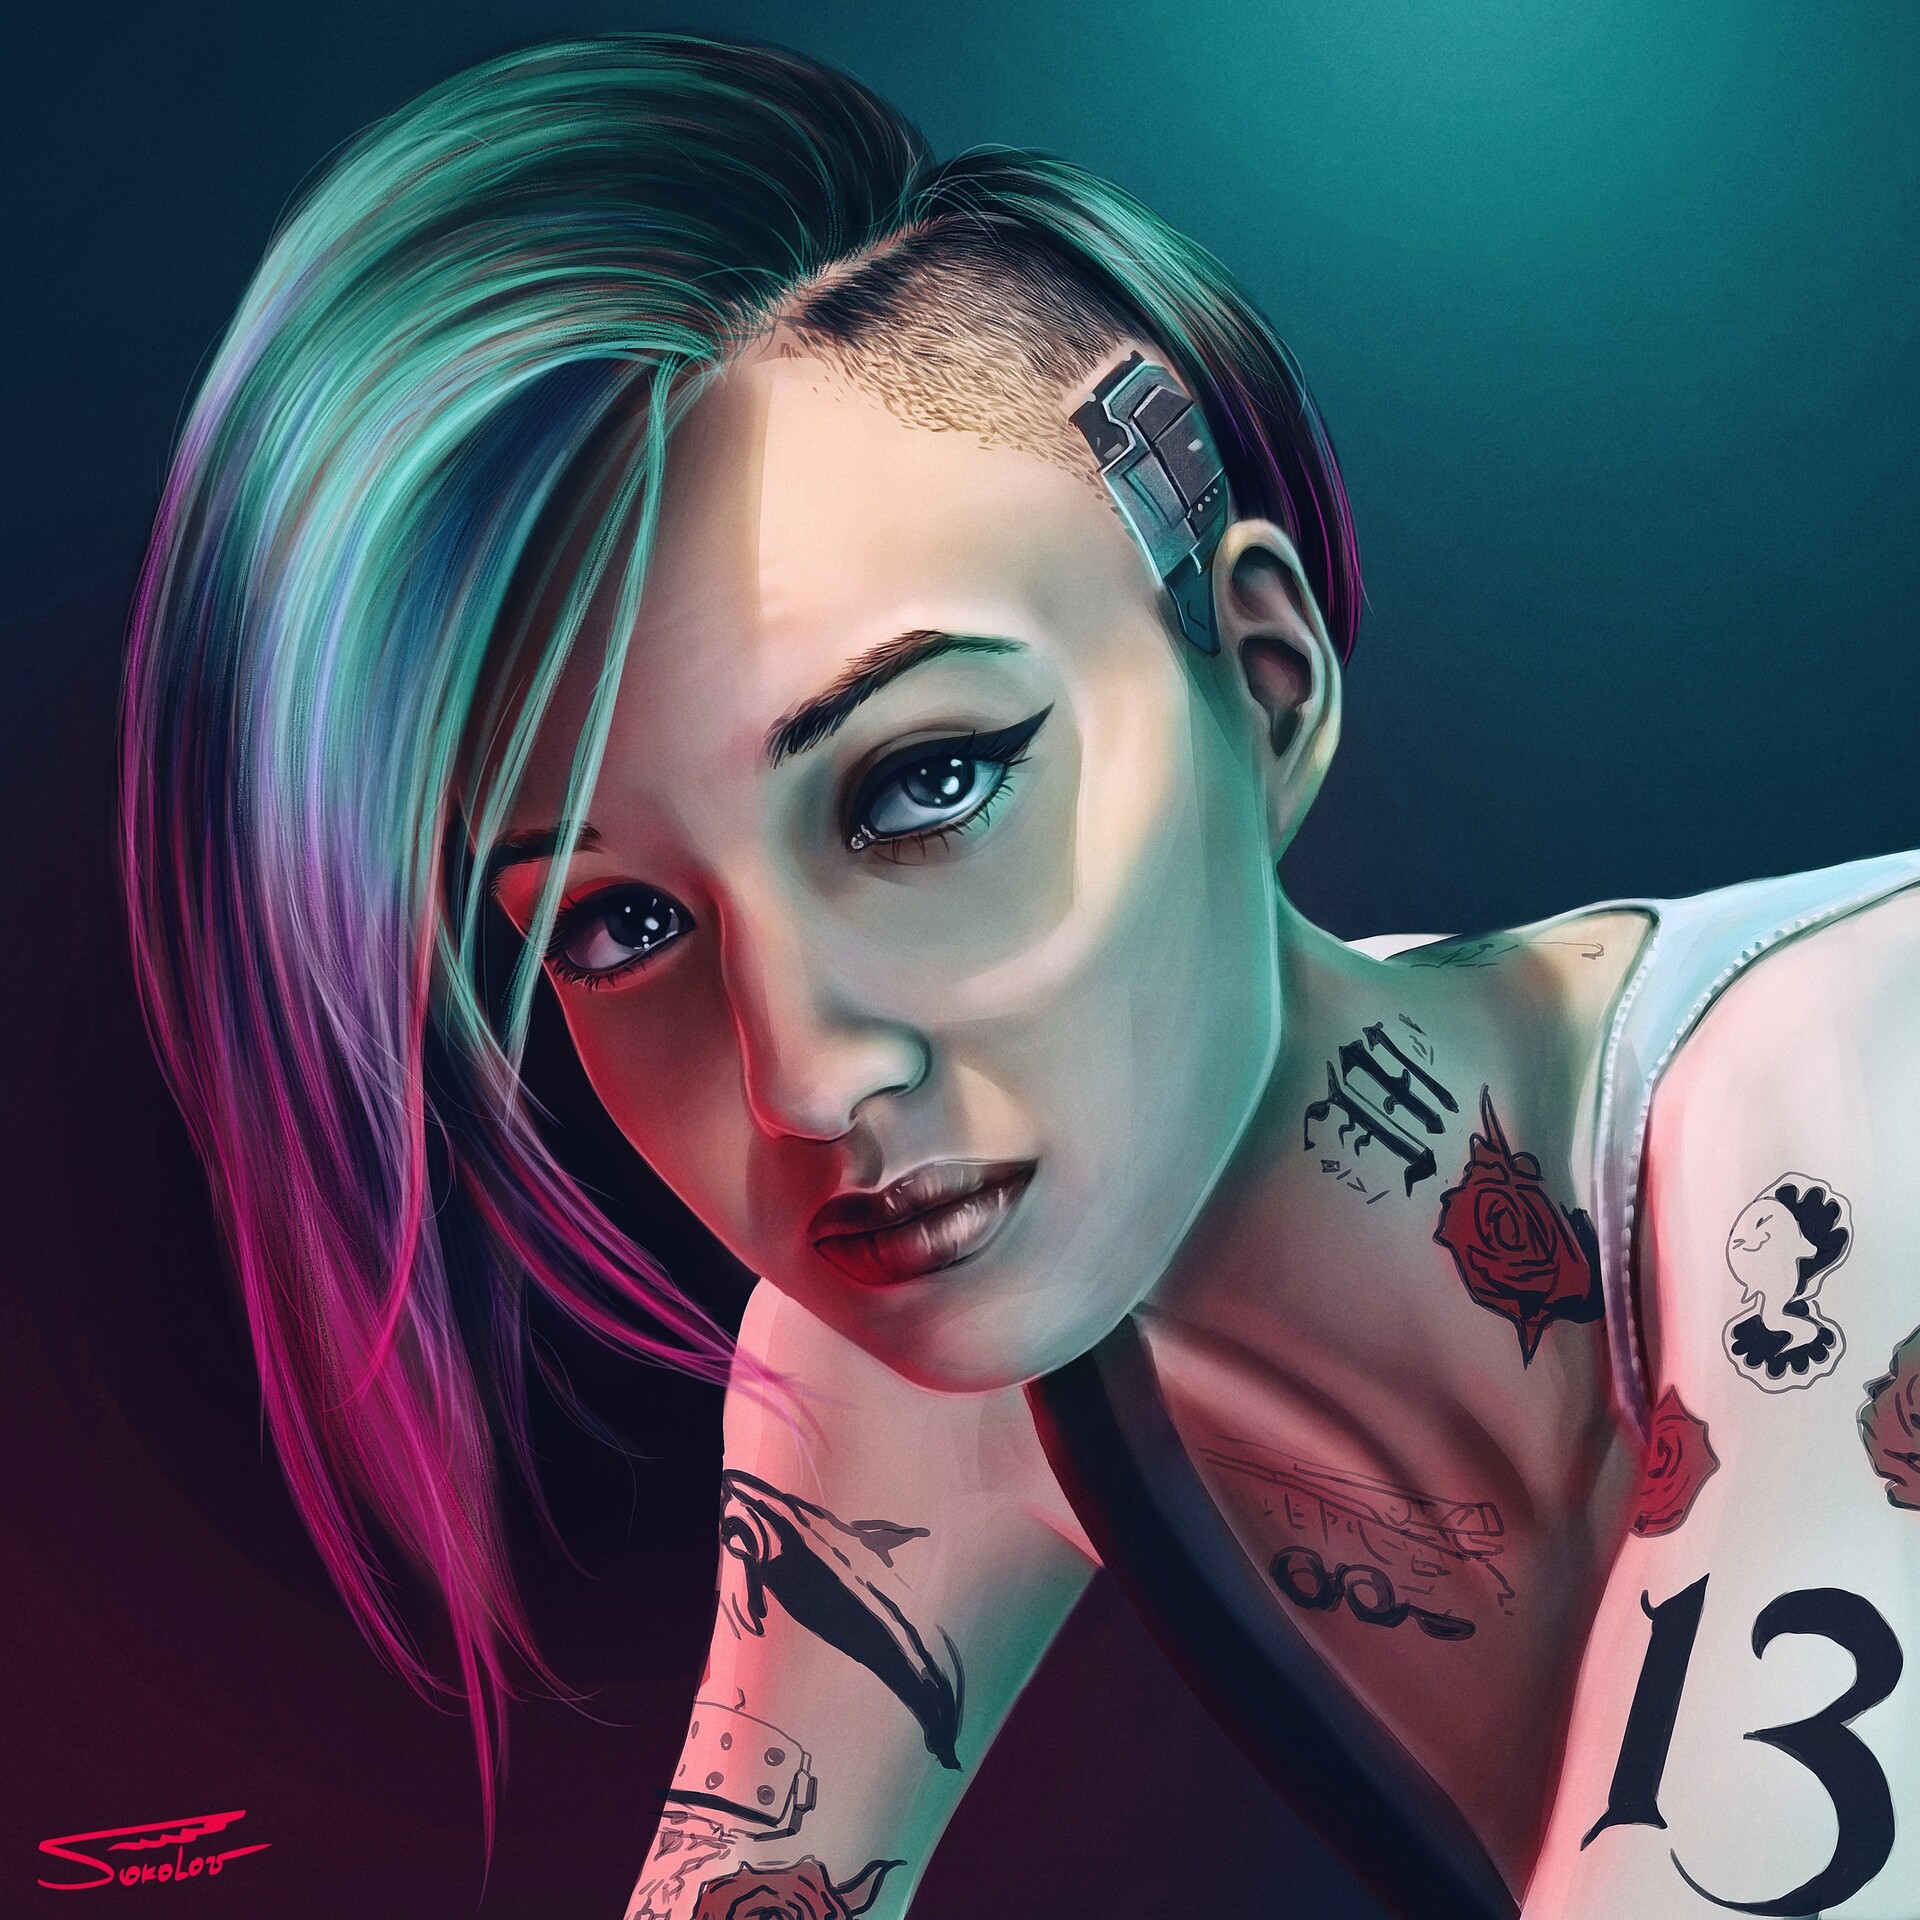 Yury Sokolov Tattoo Women Looking At Viewer Undercut Hairstyle Face Dyed Hair Video Game Girls Digit 1920x1920